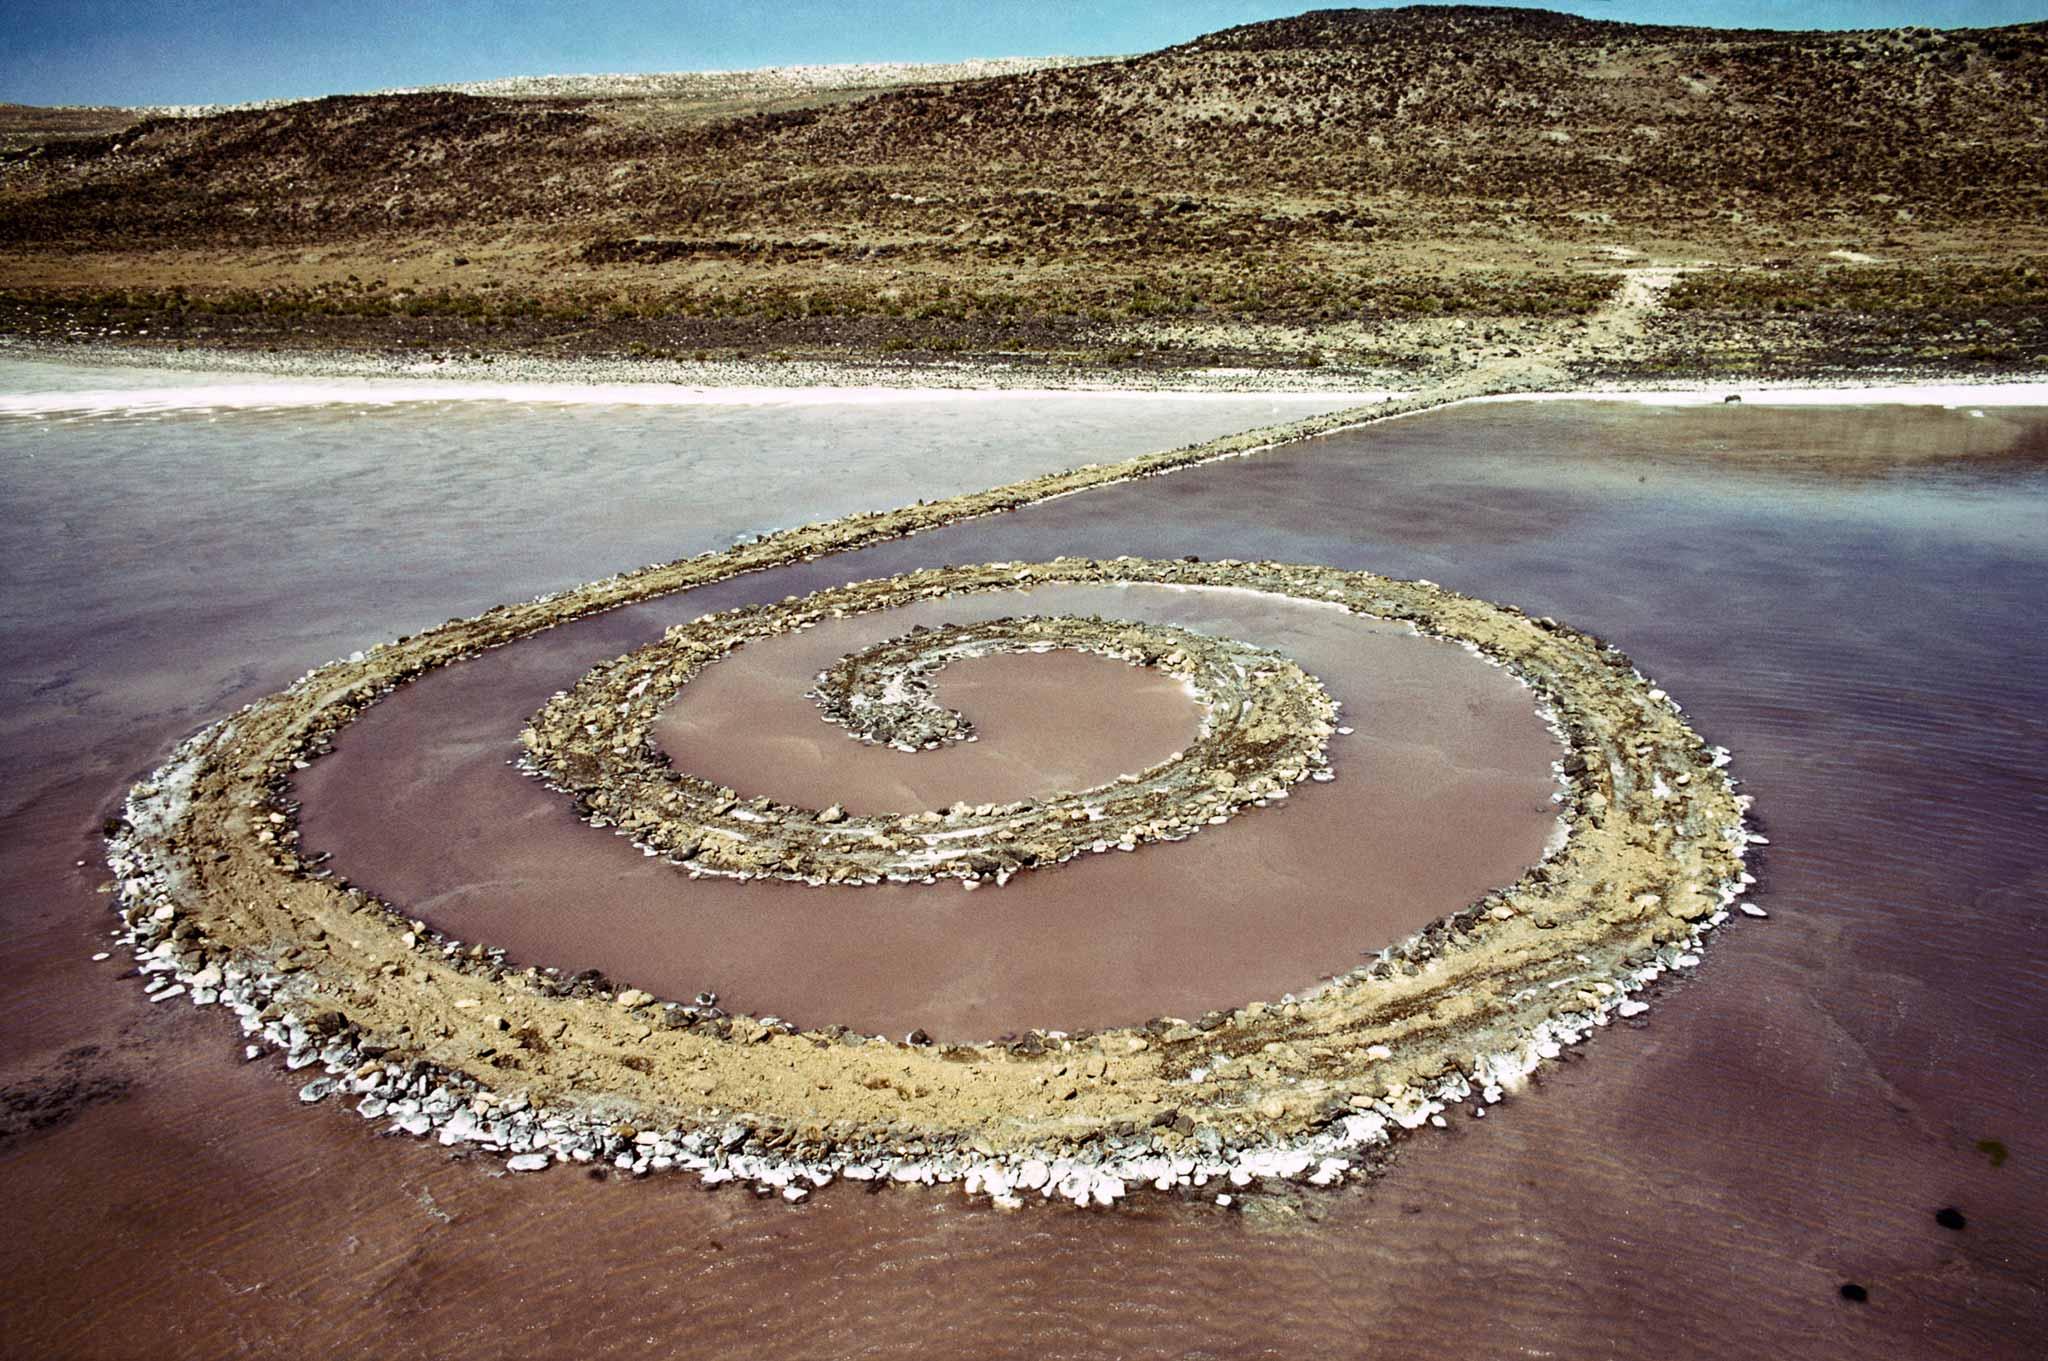 Robert Smithson's Spiral Jetty made of rock and salt in the Great Salt Lake  photographed from the air.